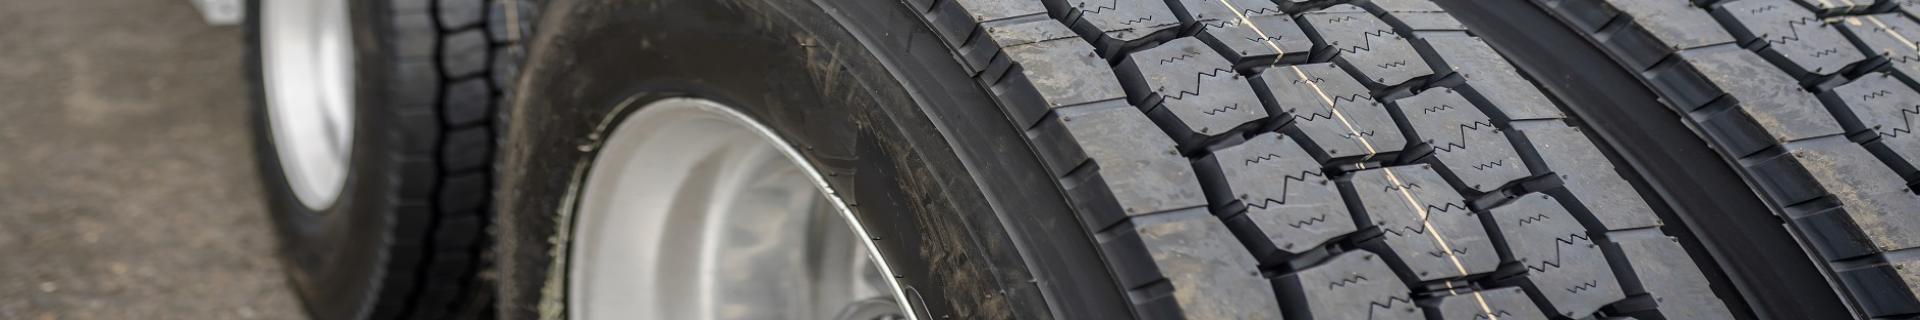 Corrective Action Training: Tires